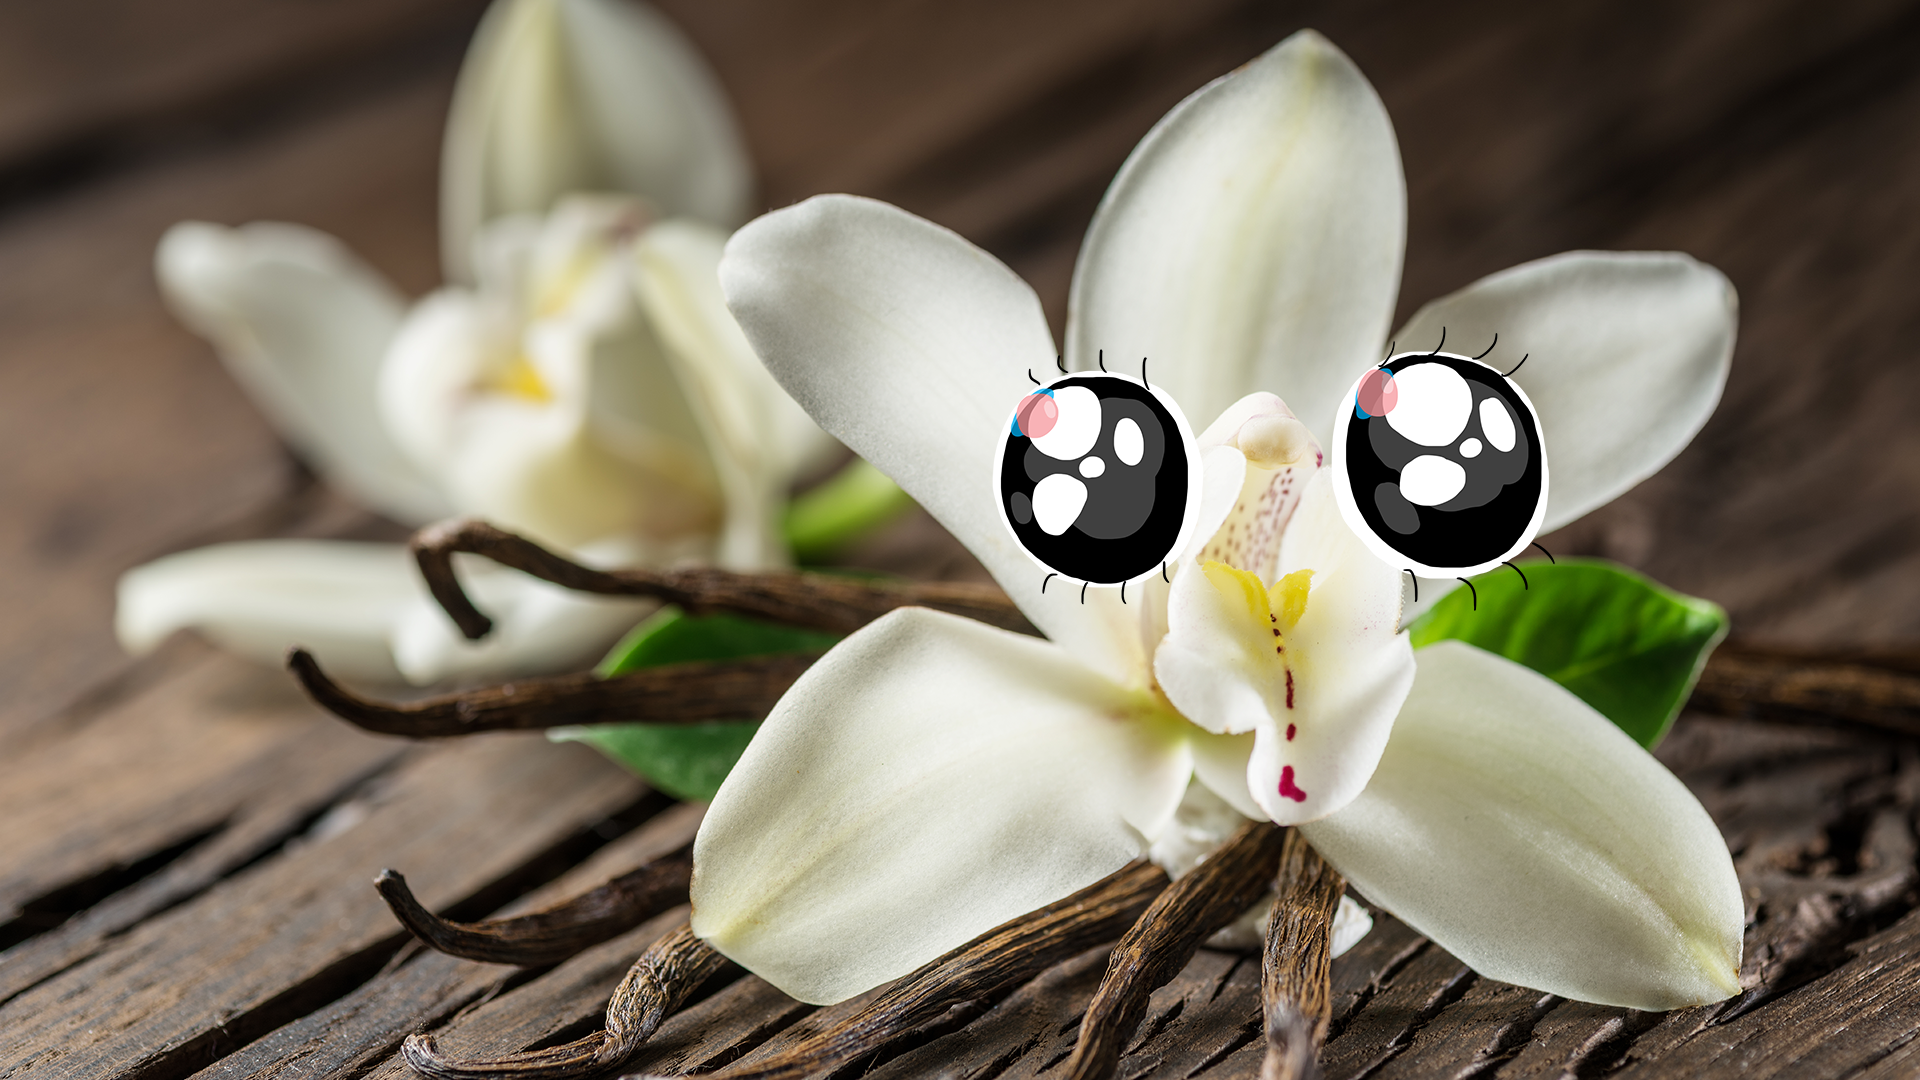 A delicate white flower with big cartoon eyes